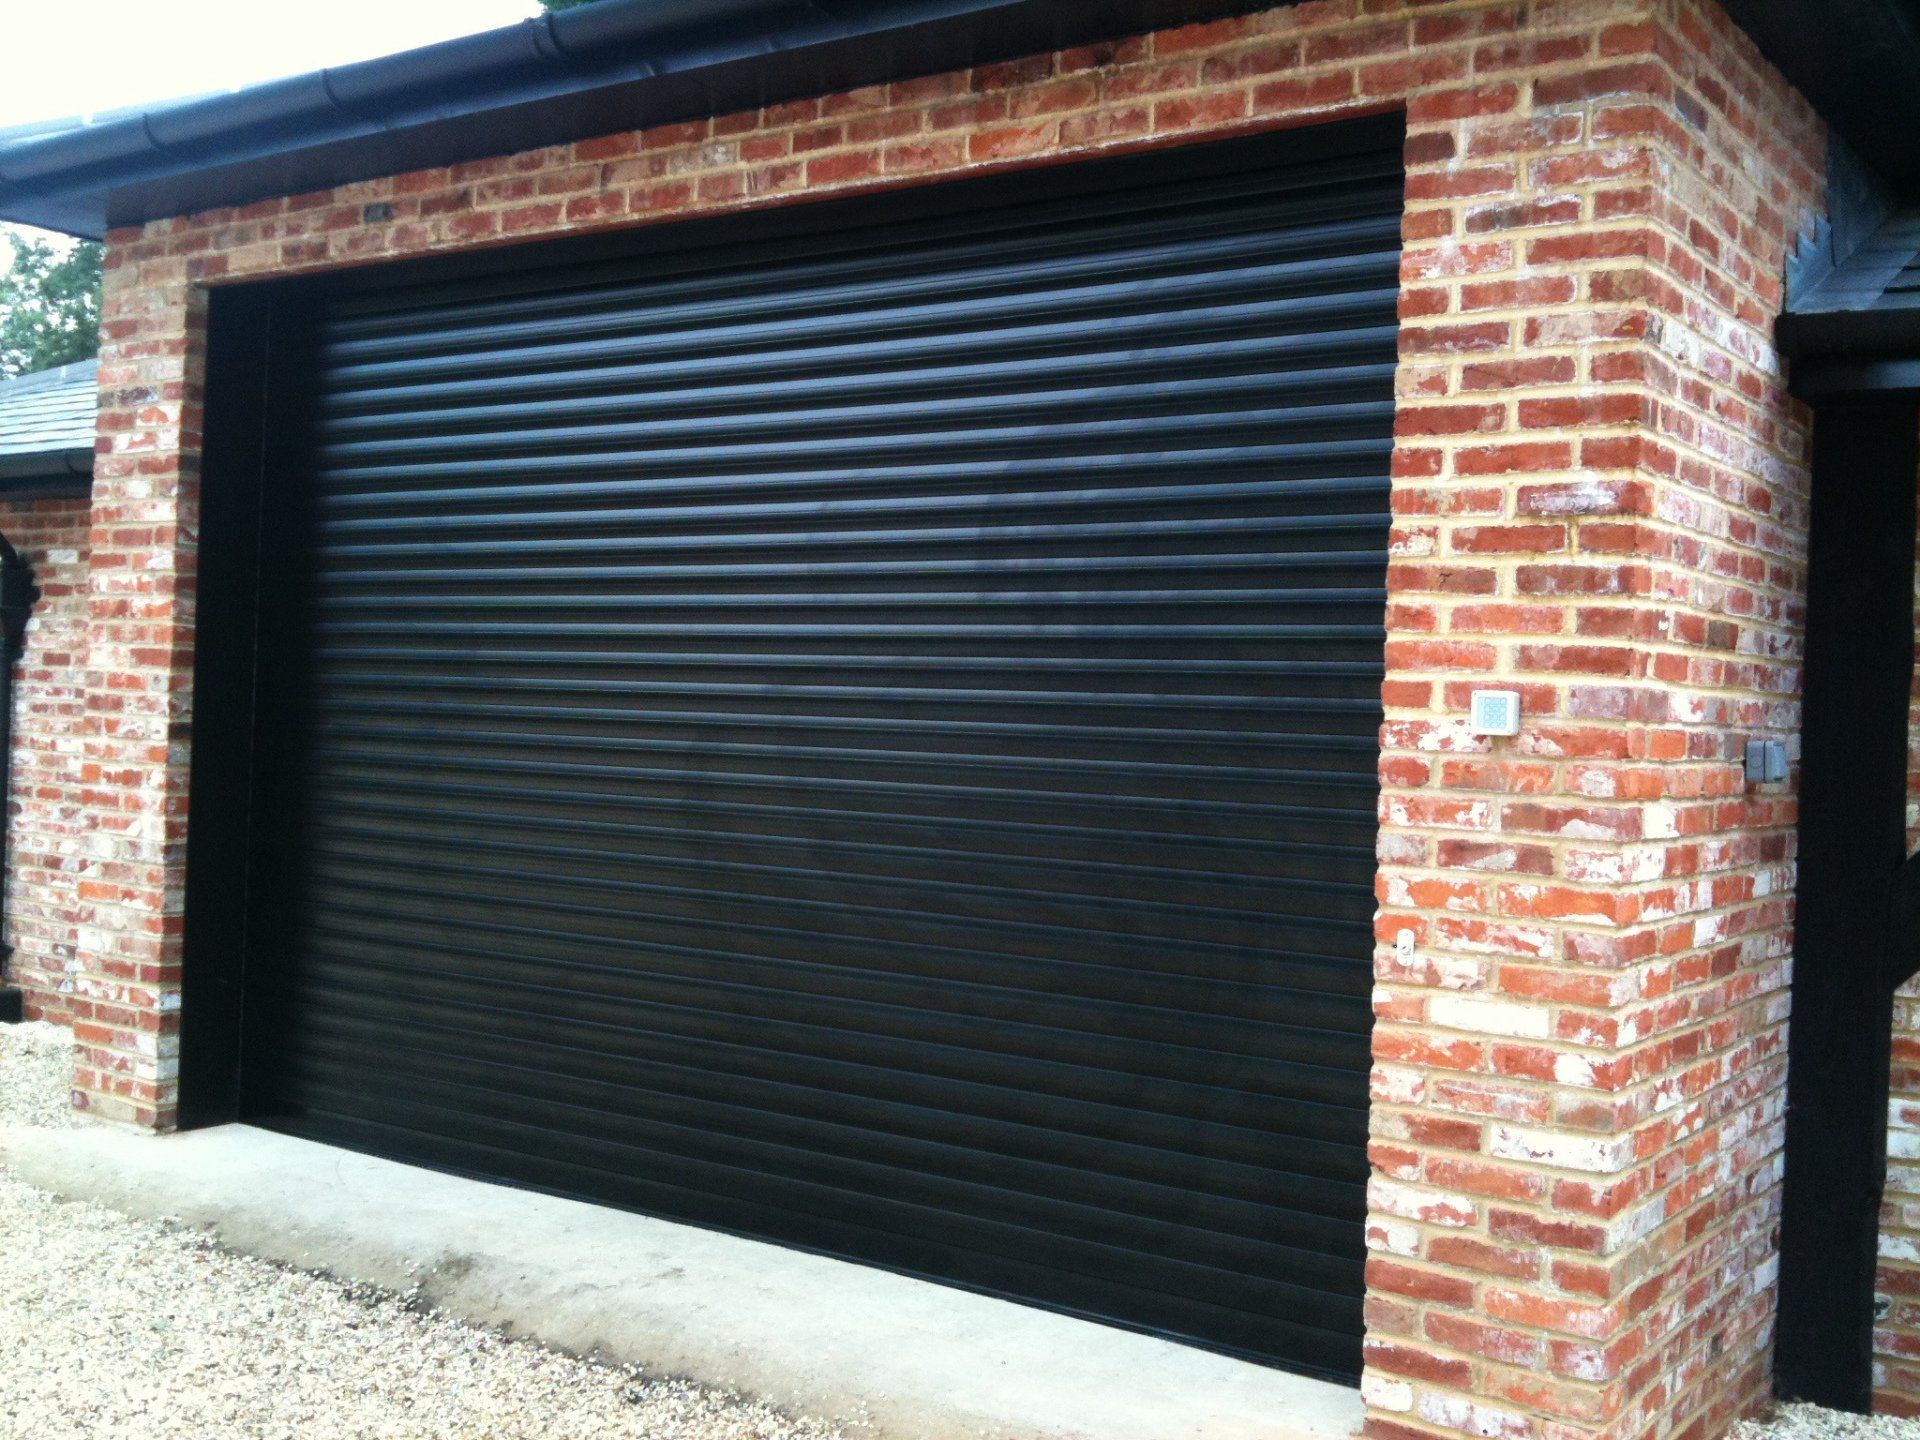 A newly fitted black garage rolling door attached to a house